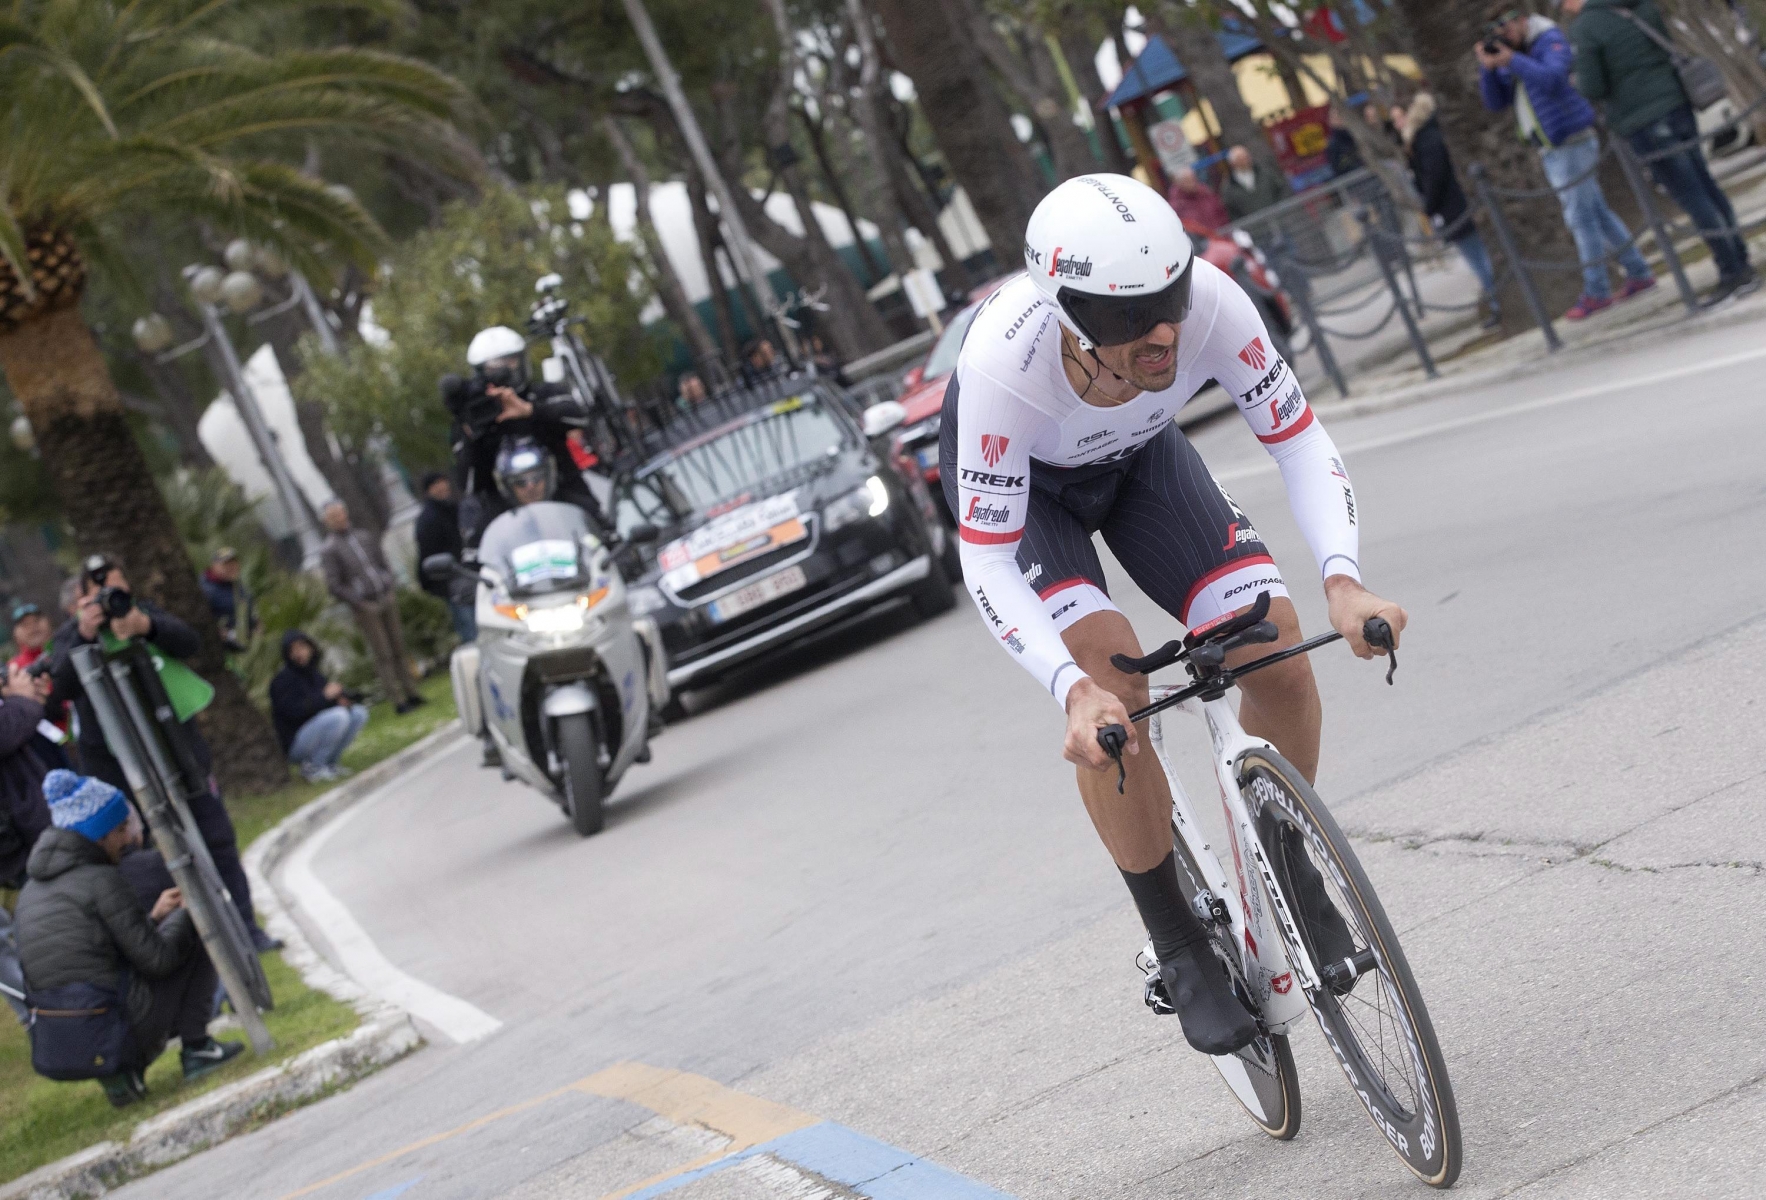 epa05213054 Swiss rider Fabian Cancellara of Trek Segafredo in action during the seventh and final stage of the 2016 Tirreno-Adriatico cycling race, an individual time trial over 10km in San Benedetto del Tronto, Italy, 15 March 2016.  EPA/CLAUDIO PERI ITALY CYCLING TIRRENO ADRIATICO